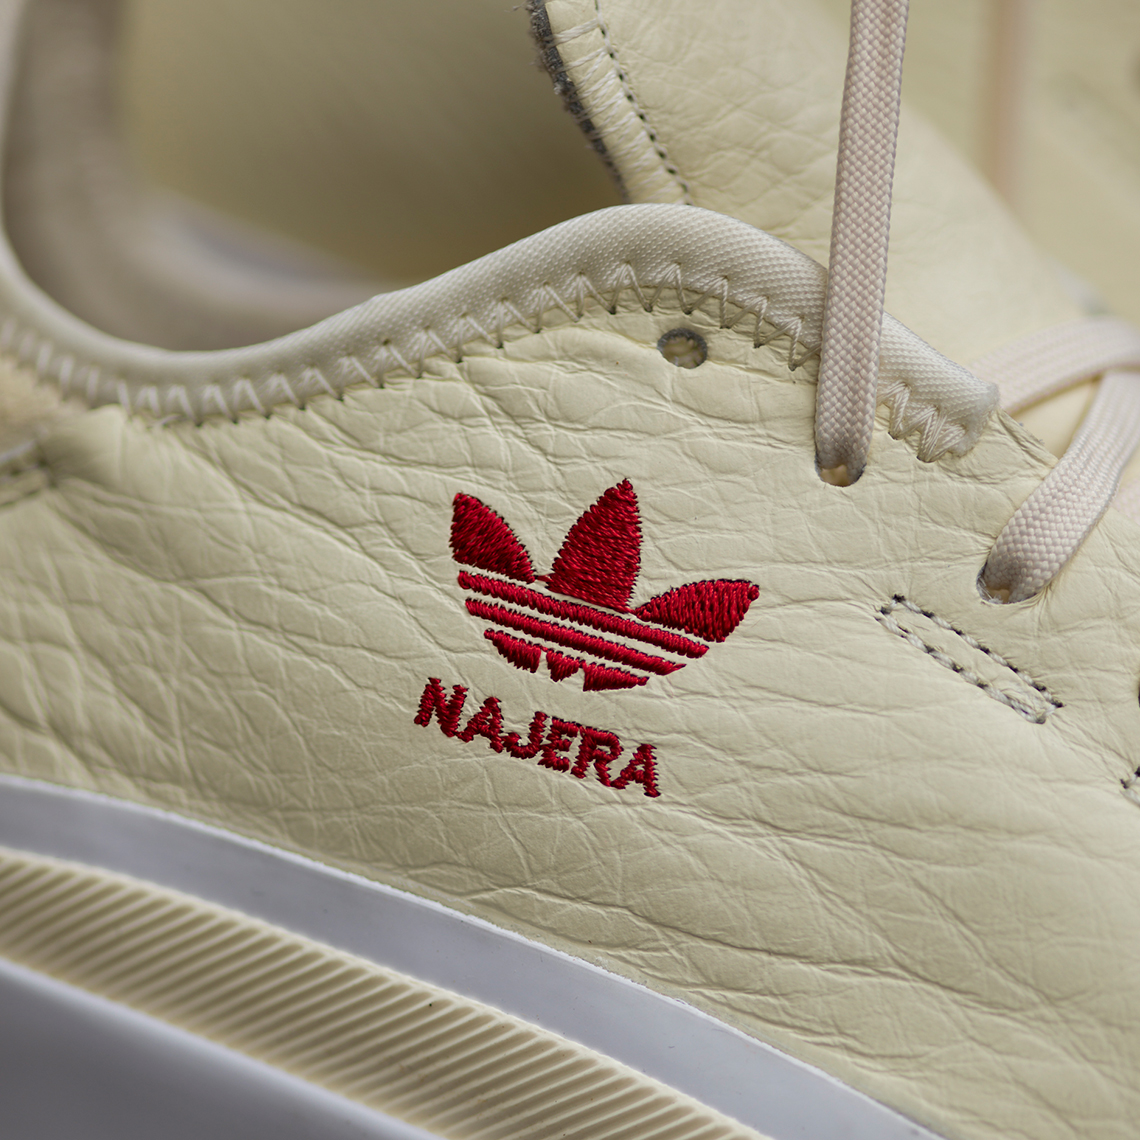 wake up lexicon curriculum adidas Skateboarding Sabalo White Red DB3064 Store List | SneakerNews.com